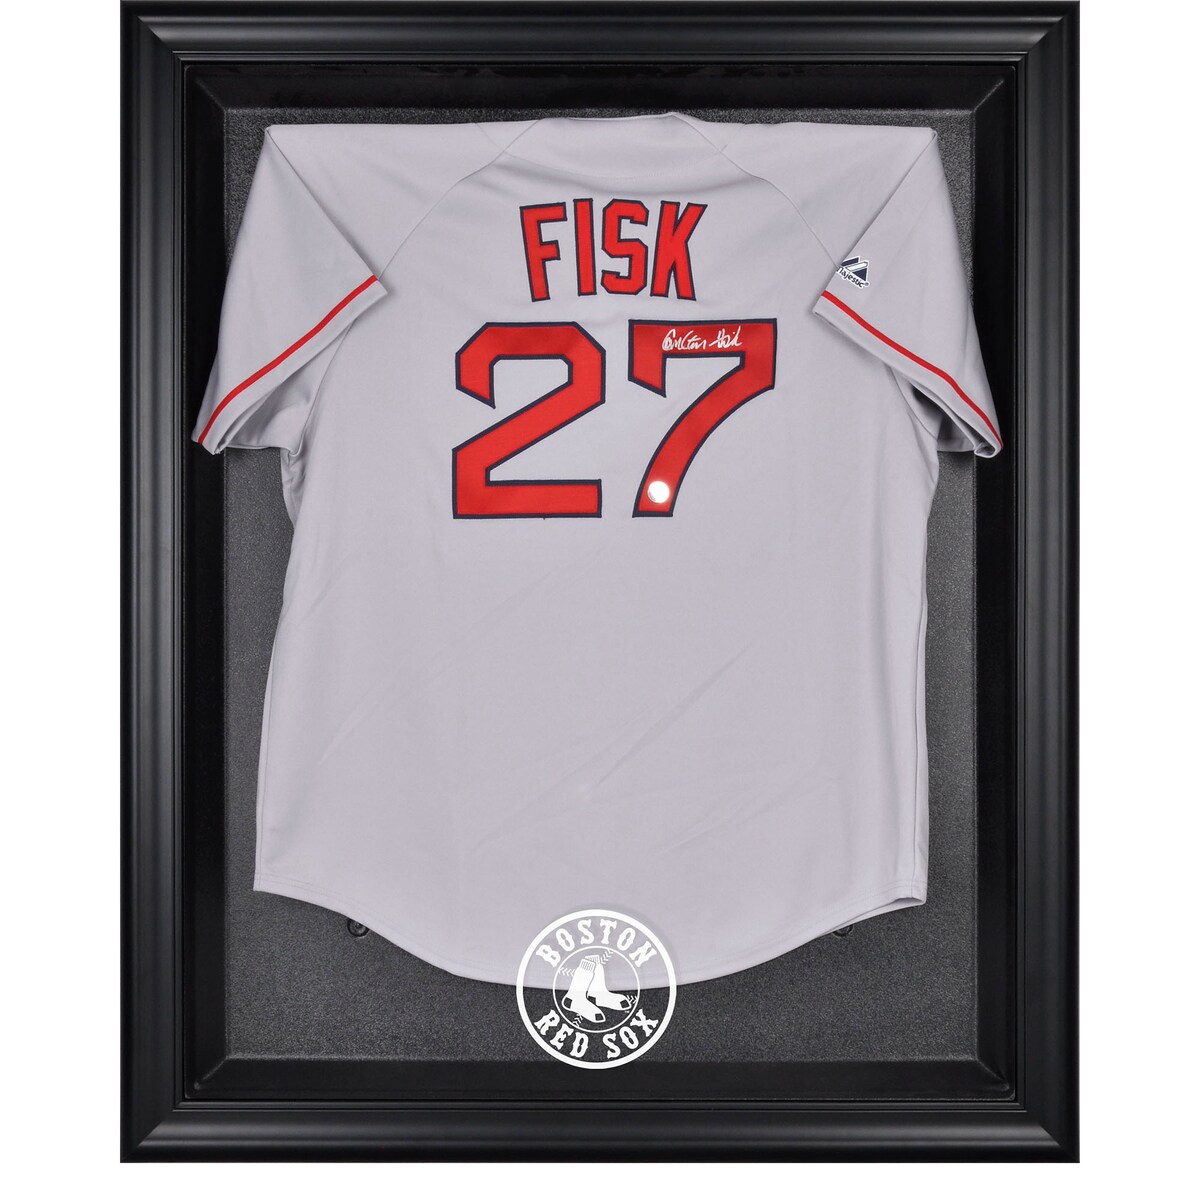 The Boston Red Sox black framed logo jersey display case opens on hinges and is easily wall mounted. It comes with a 24" clear acrylic rod to display a collectible jersey. Constructed with a durable, high-strength injection mold backing, encased by a beautiful wood frame. Comes engraved with the team logo. Officially licensed by Major League Baseball. The inner dimensions of the case are 38" x 29 1/2"x 3" with the outer measurements of 42" x 34 1/2" x 3 1/2". Memorabilia sold separately.Memorabilia sold separatelyHas a LogoEasily wall mountedWood frameOfficially licensedImportedOfficially licensed MLB productCollectible jersey display caseBrand: Fanatics AuthenticIncludes acrylic rod to hold jerseyEngraved team graphicsMade in the U.S.A.Hinges to open easily